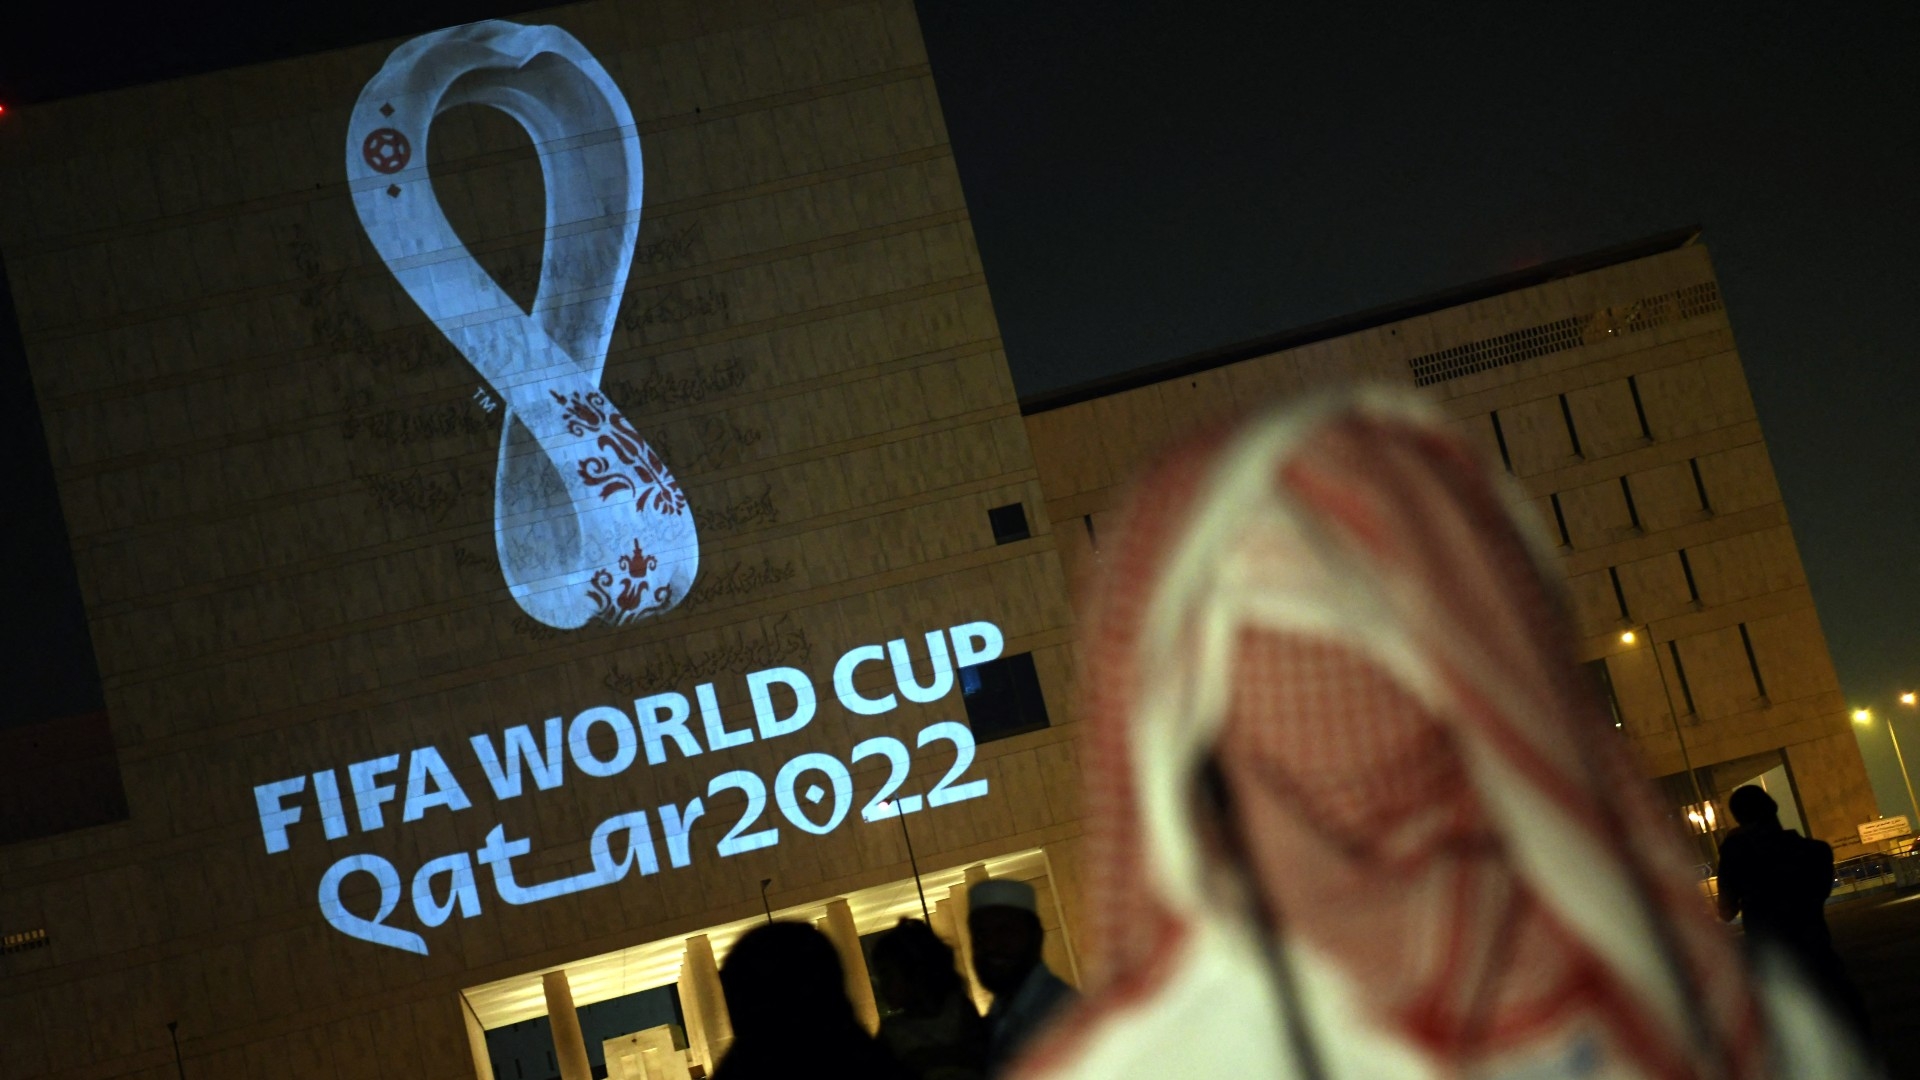 People gather at Doha's traditional Souq Waqif market as the official logo of Fifa World Cup Qatar 2022 is projected on the front of a building, 3 September 2019 (AFP)